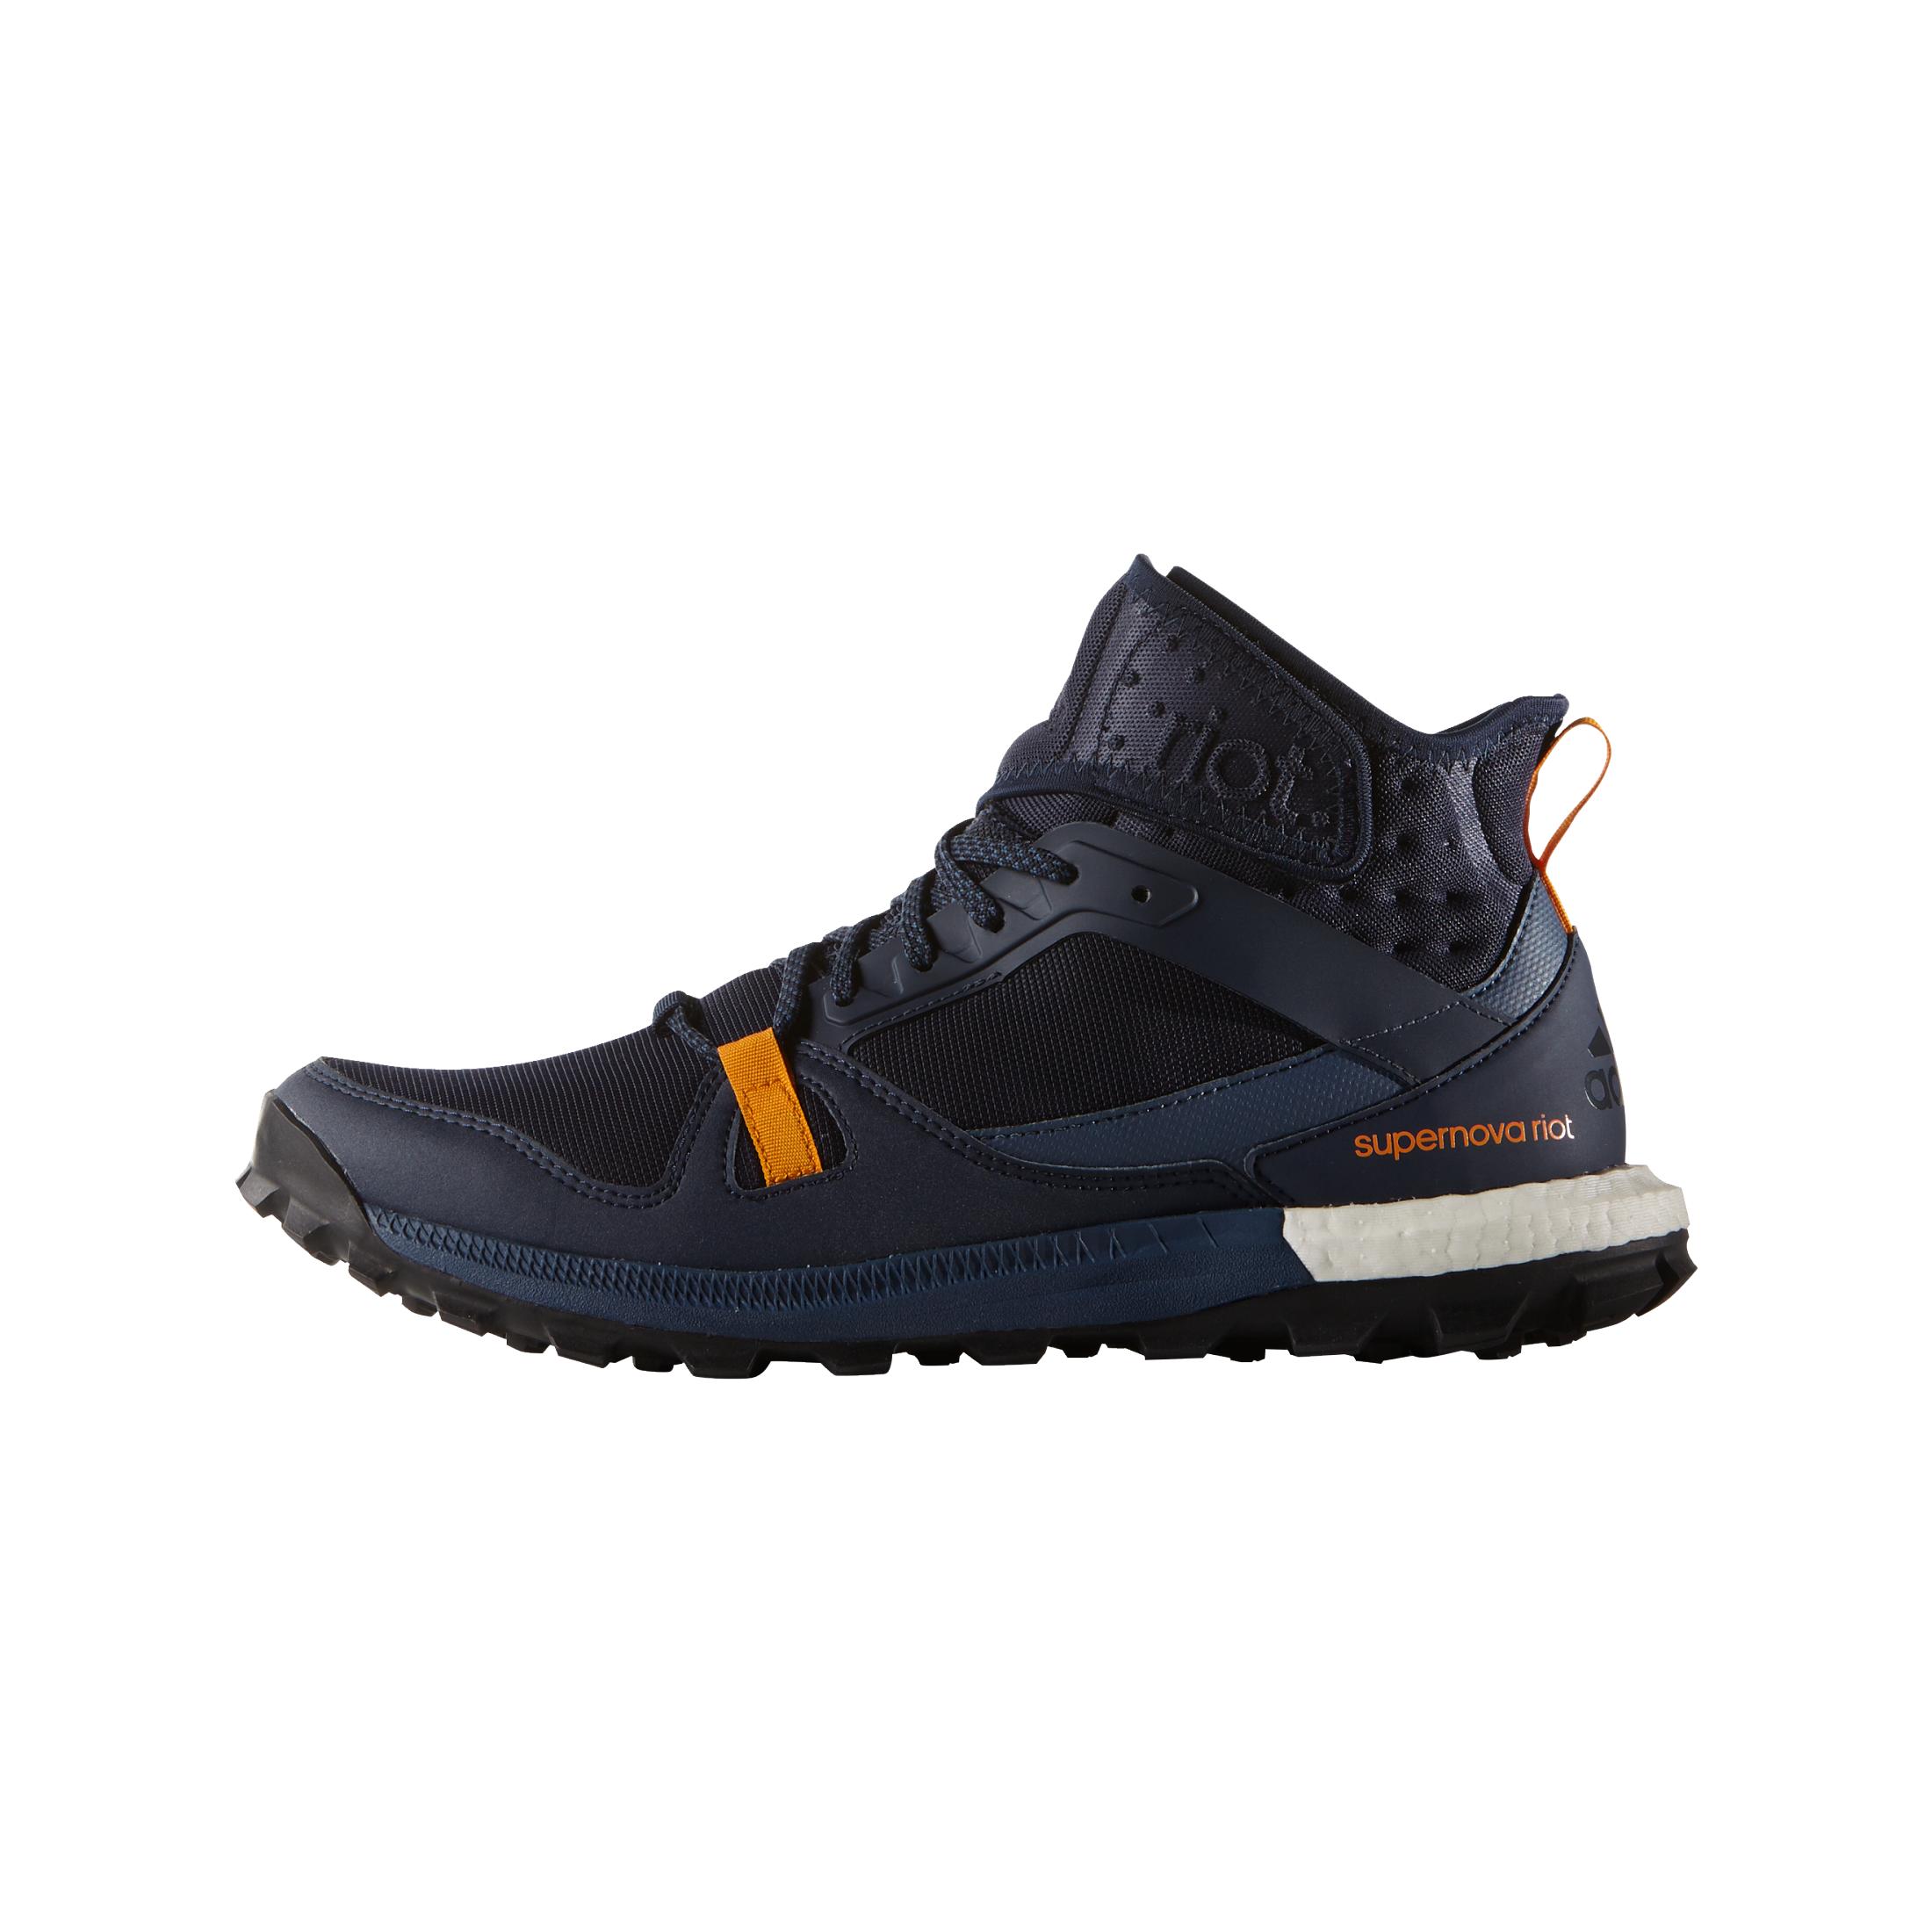 adidas riot 7 homme